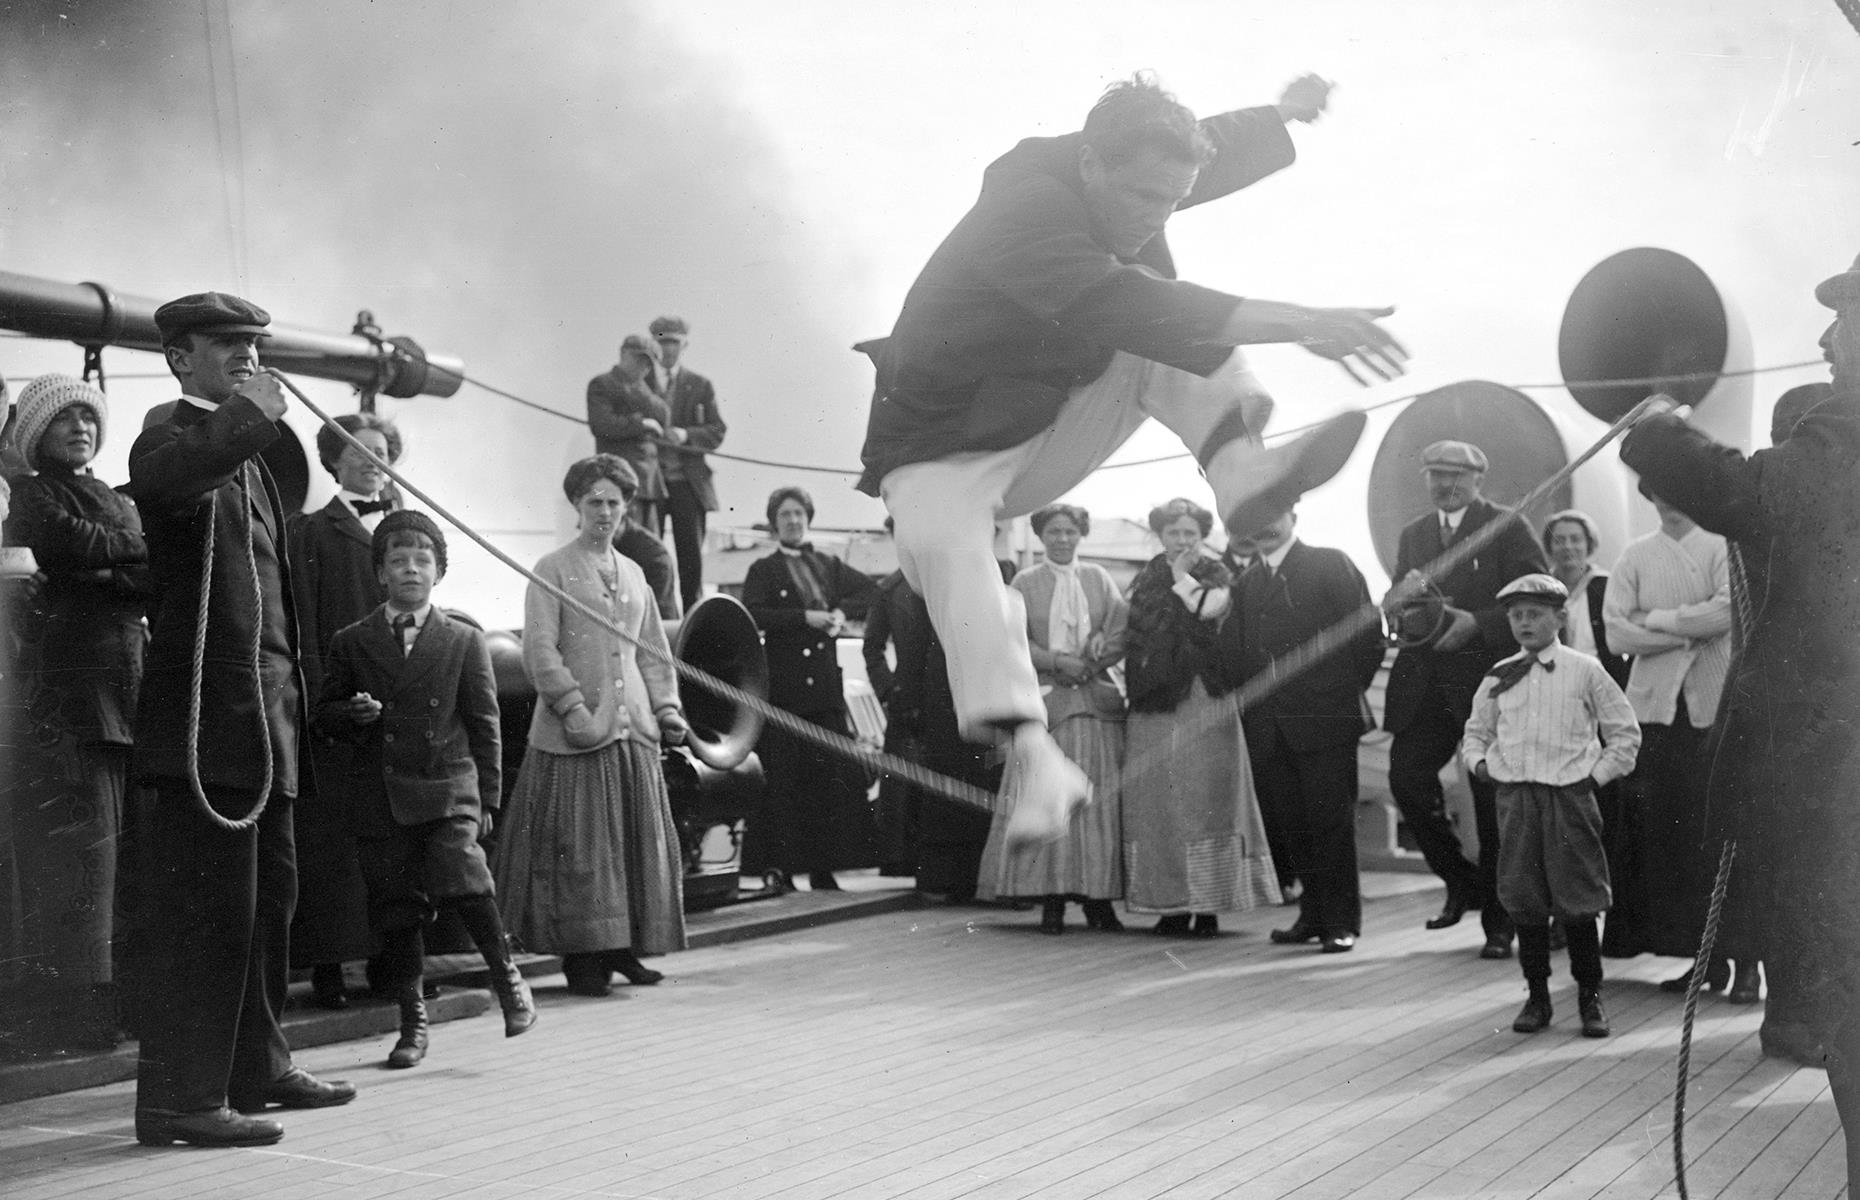 Many early 20th-century cruise ships had plenty of luxury amenities, but the entertainment on offer was a far cry from the glitzy shows and hi-tech attractions we're used to today. Common pastimes included shuffleboard, dancing and games like tug of war. Captured in 1912, these passengers on Cunard's Franconia enjoy a high-jump contest on deck.